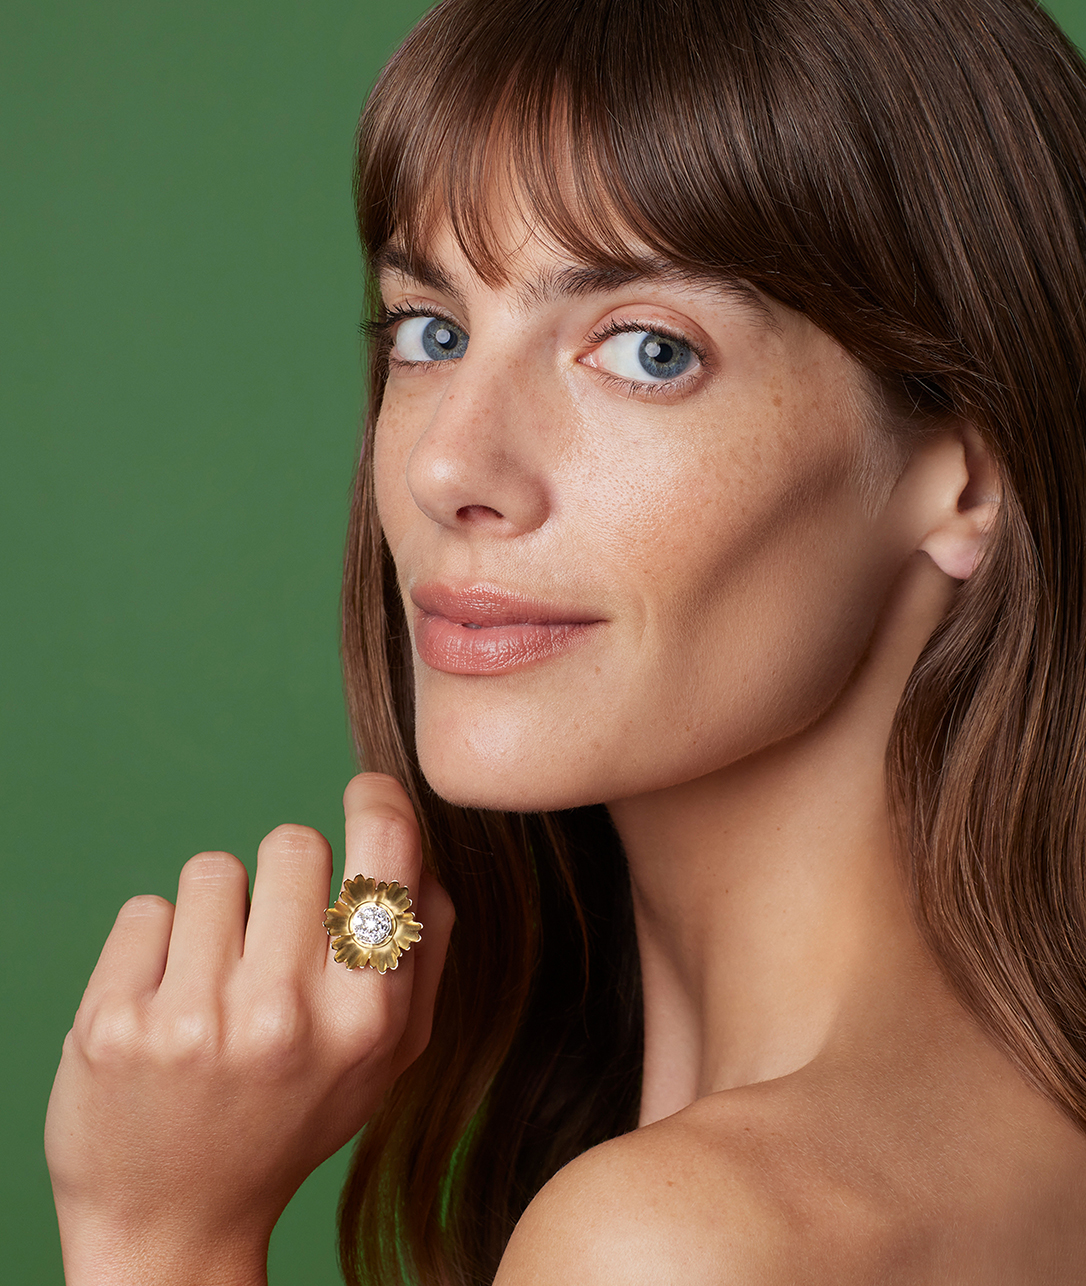 A forever-treasure like a Diamond Super Bloom Ring is the perfect piece for an unforgettable night.SHOP SUPER BLOOM